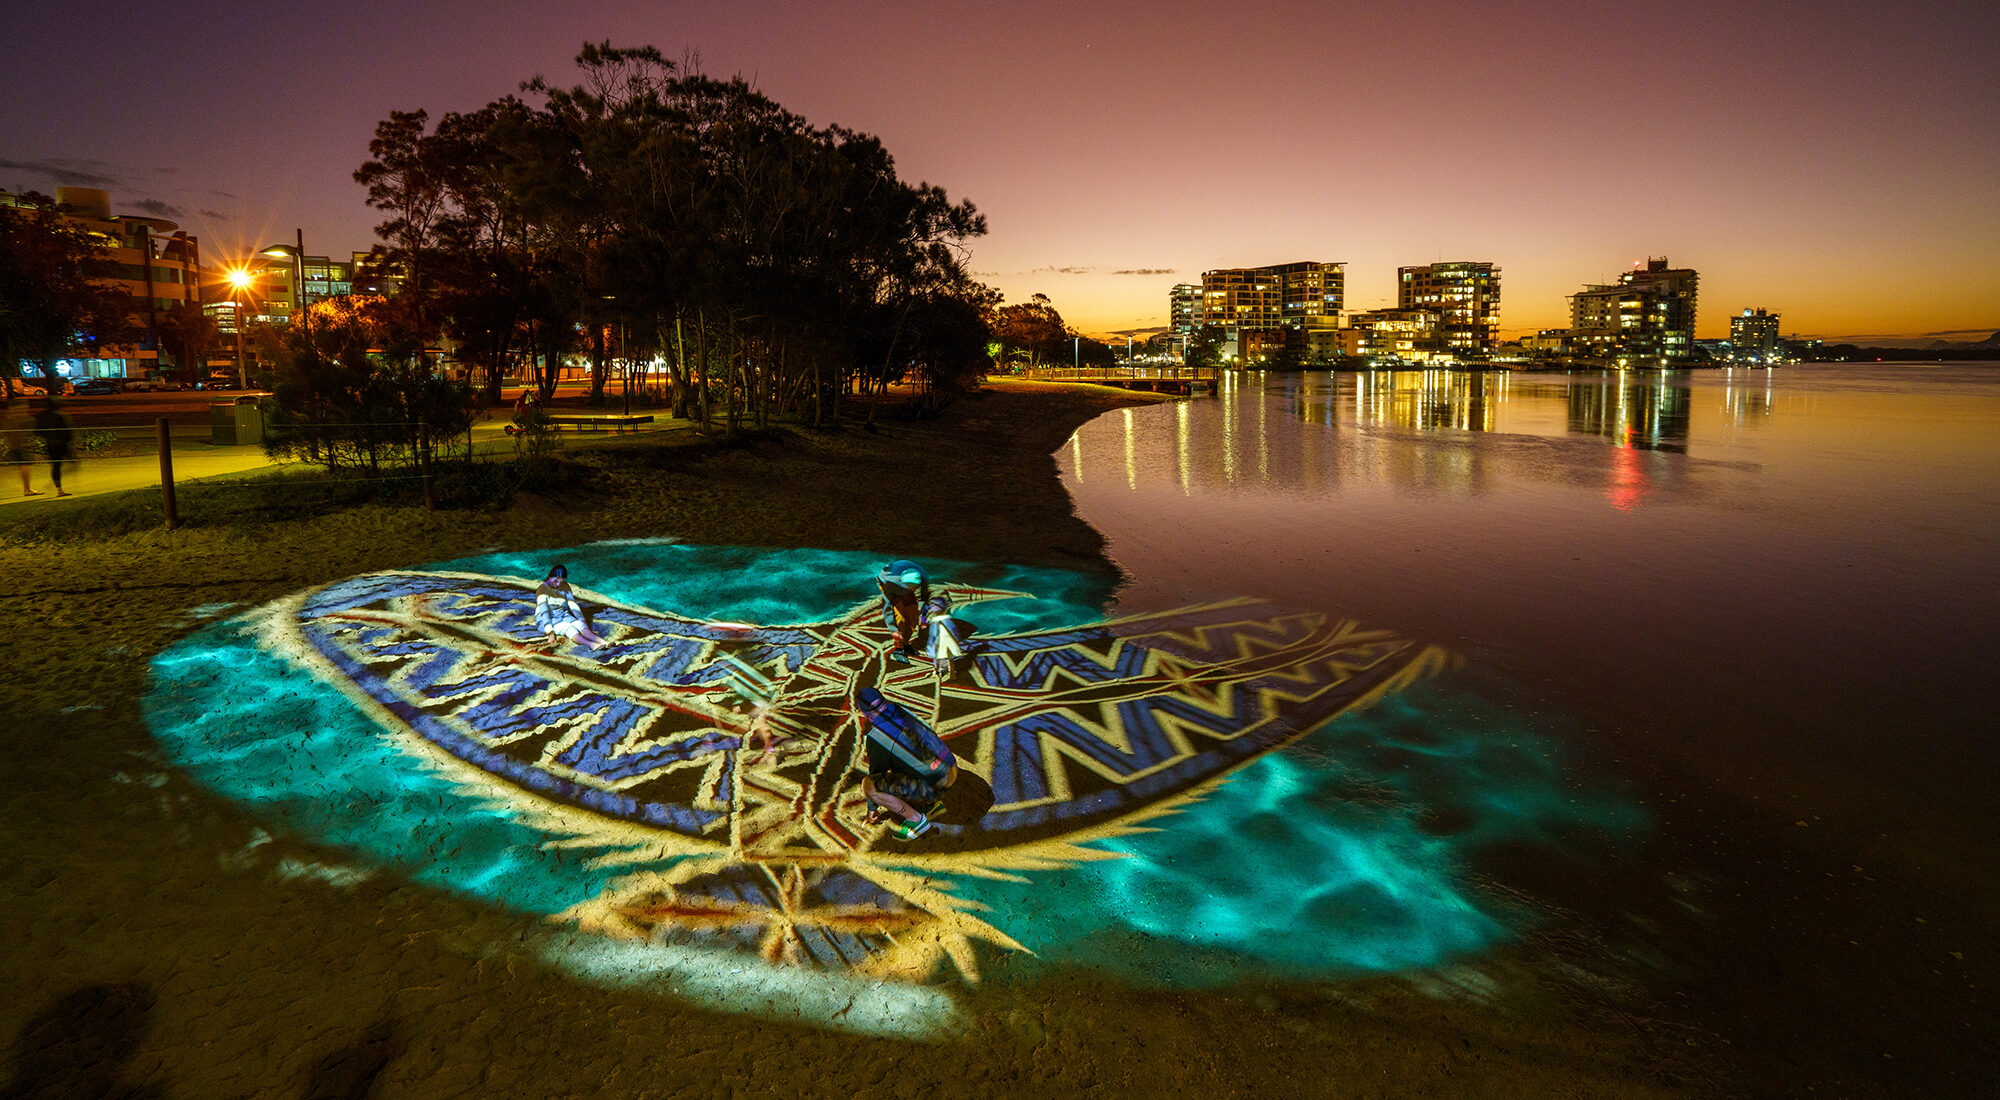 First Nation artwork projected onto the sand.